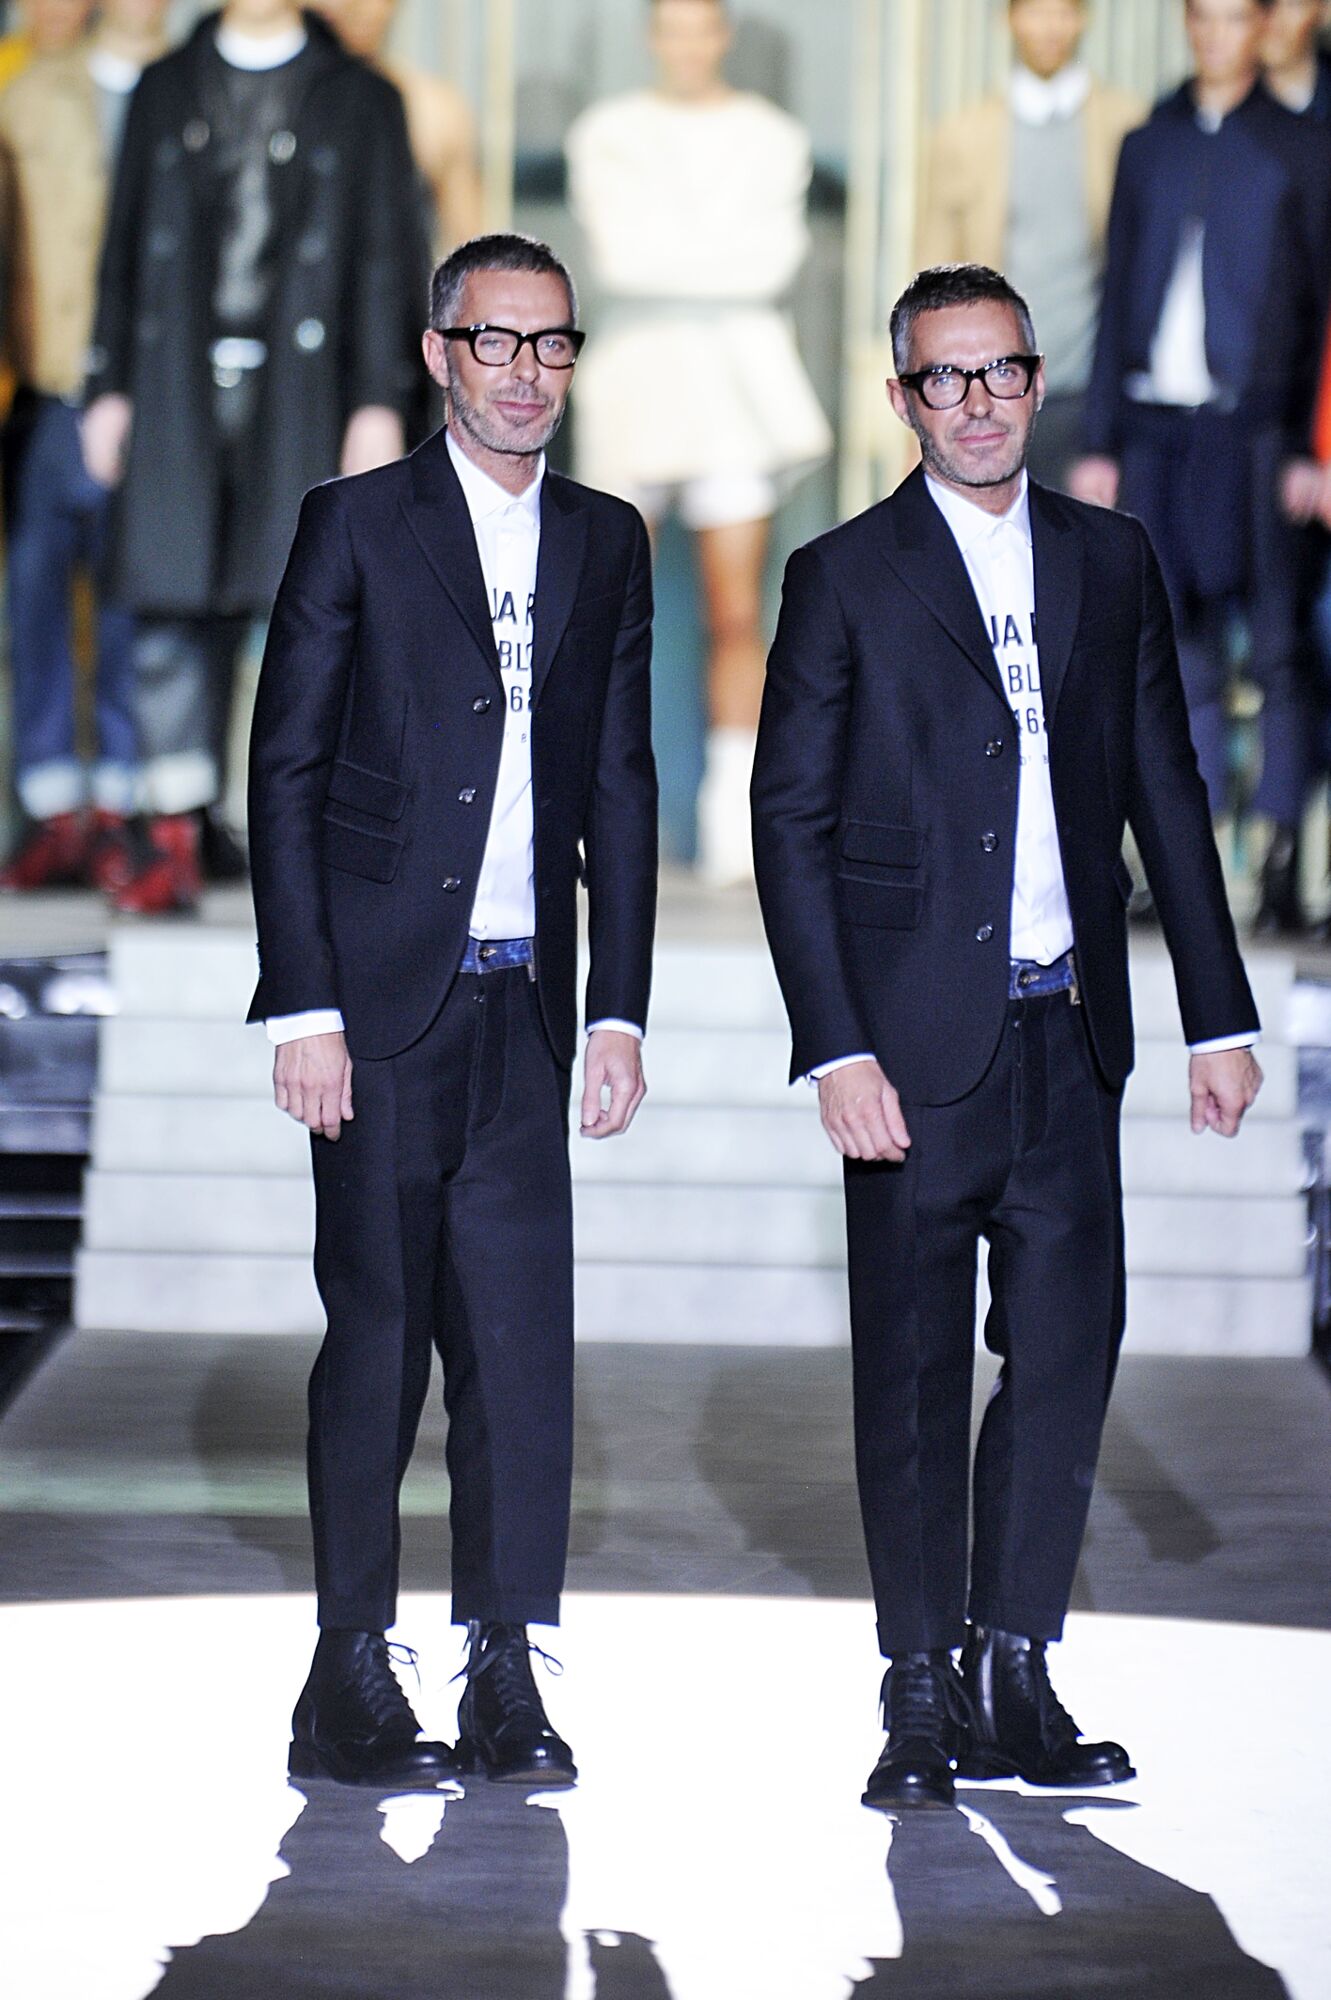 DSQUARED2 FALL WINTER 2014 MEN’S COLLECTION | The Skinny Beep